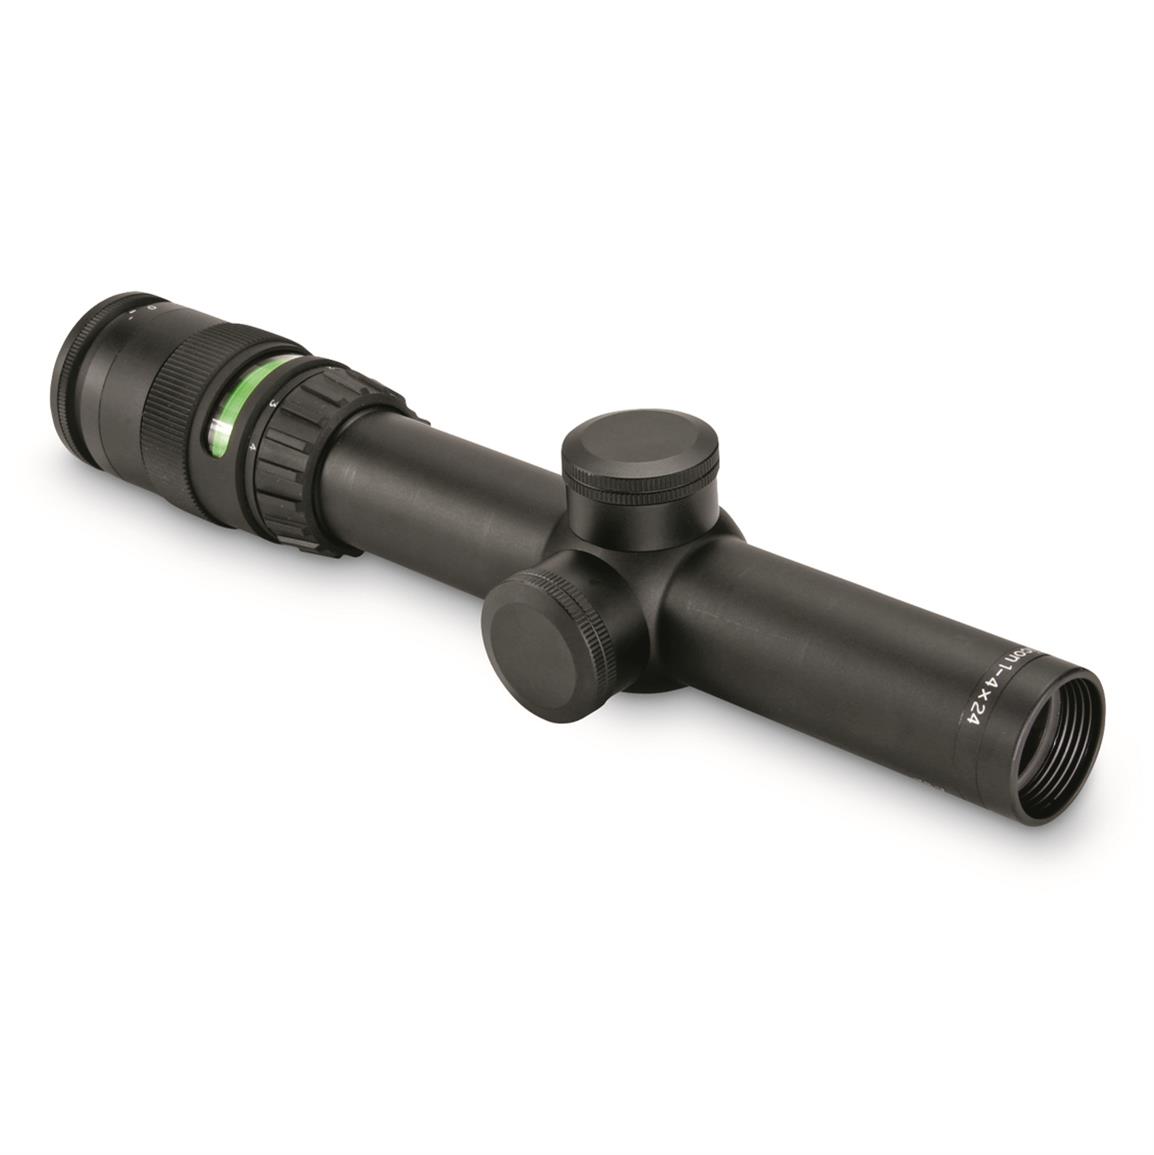 Trijicon AccuPoint 1-4x24mm Rifle Scope, 30mm Tube, Duplex Crosshair with Illuminated Green Dot